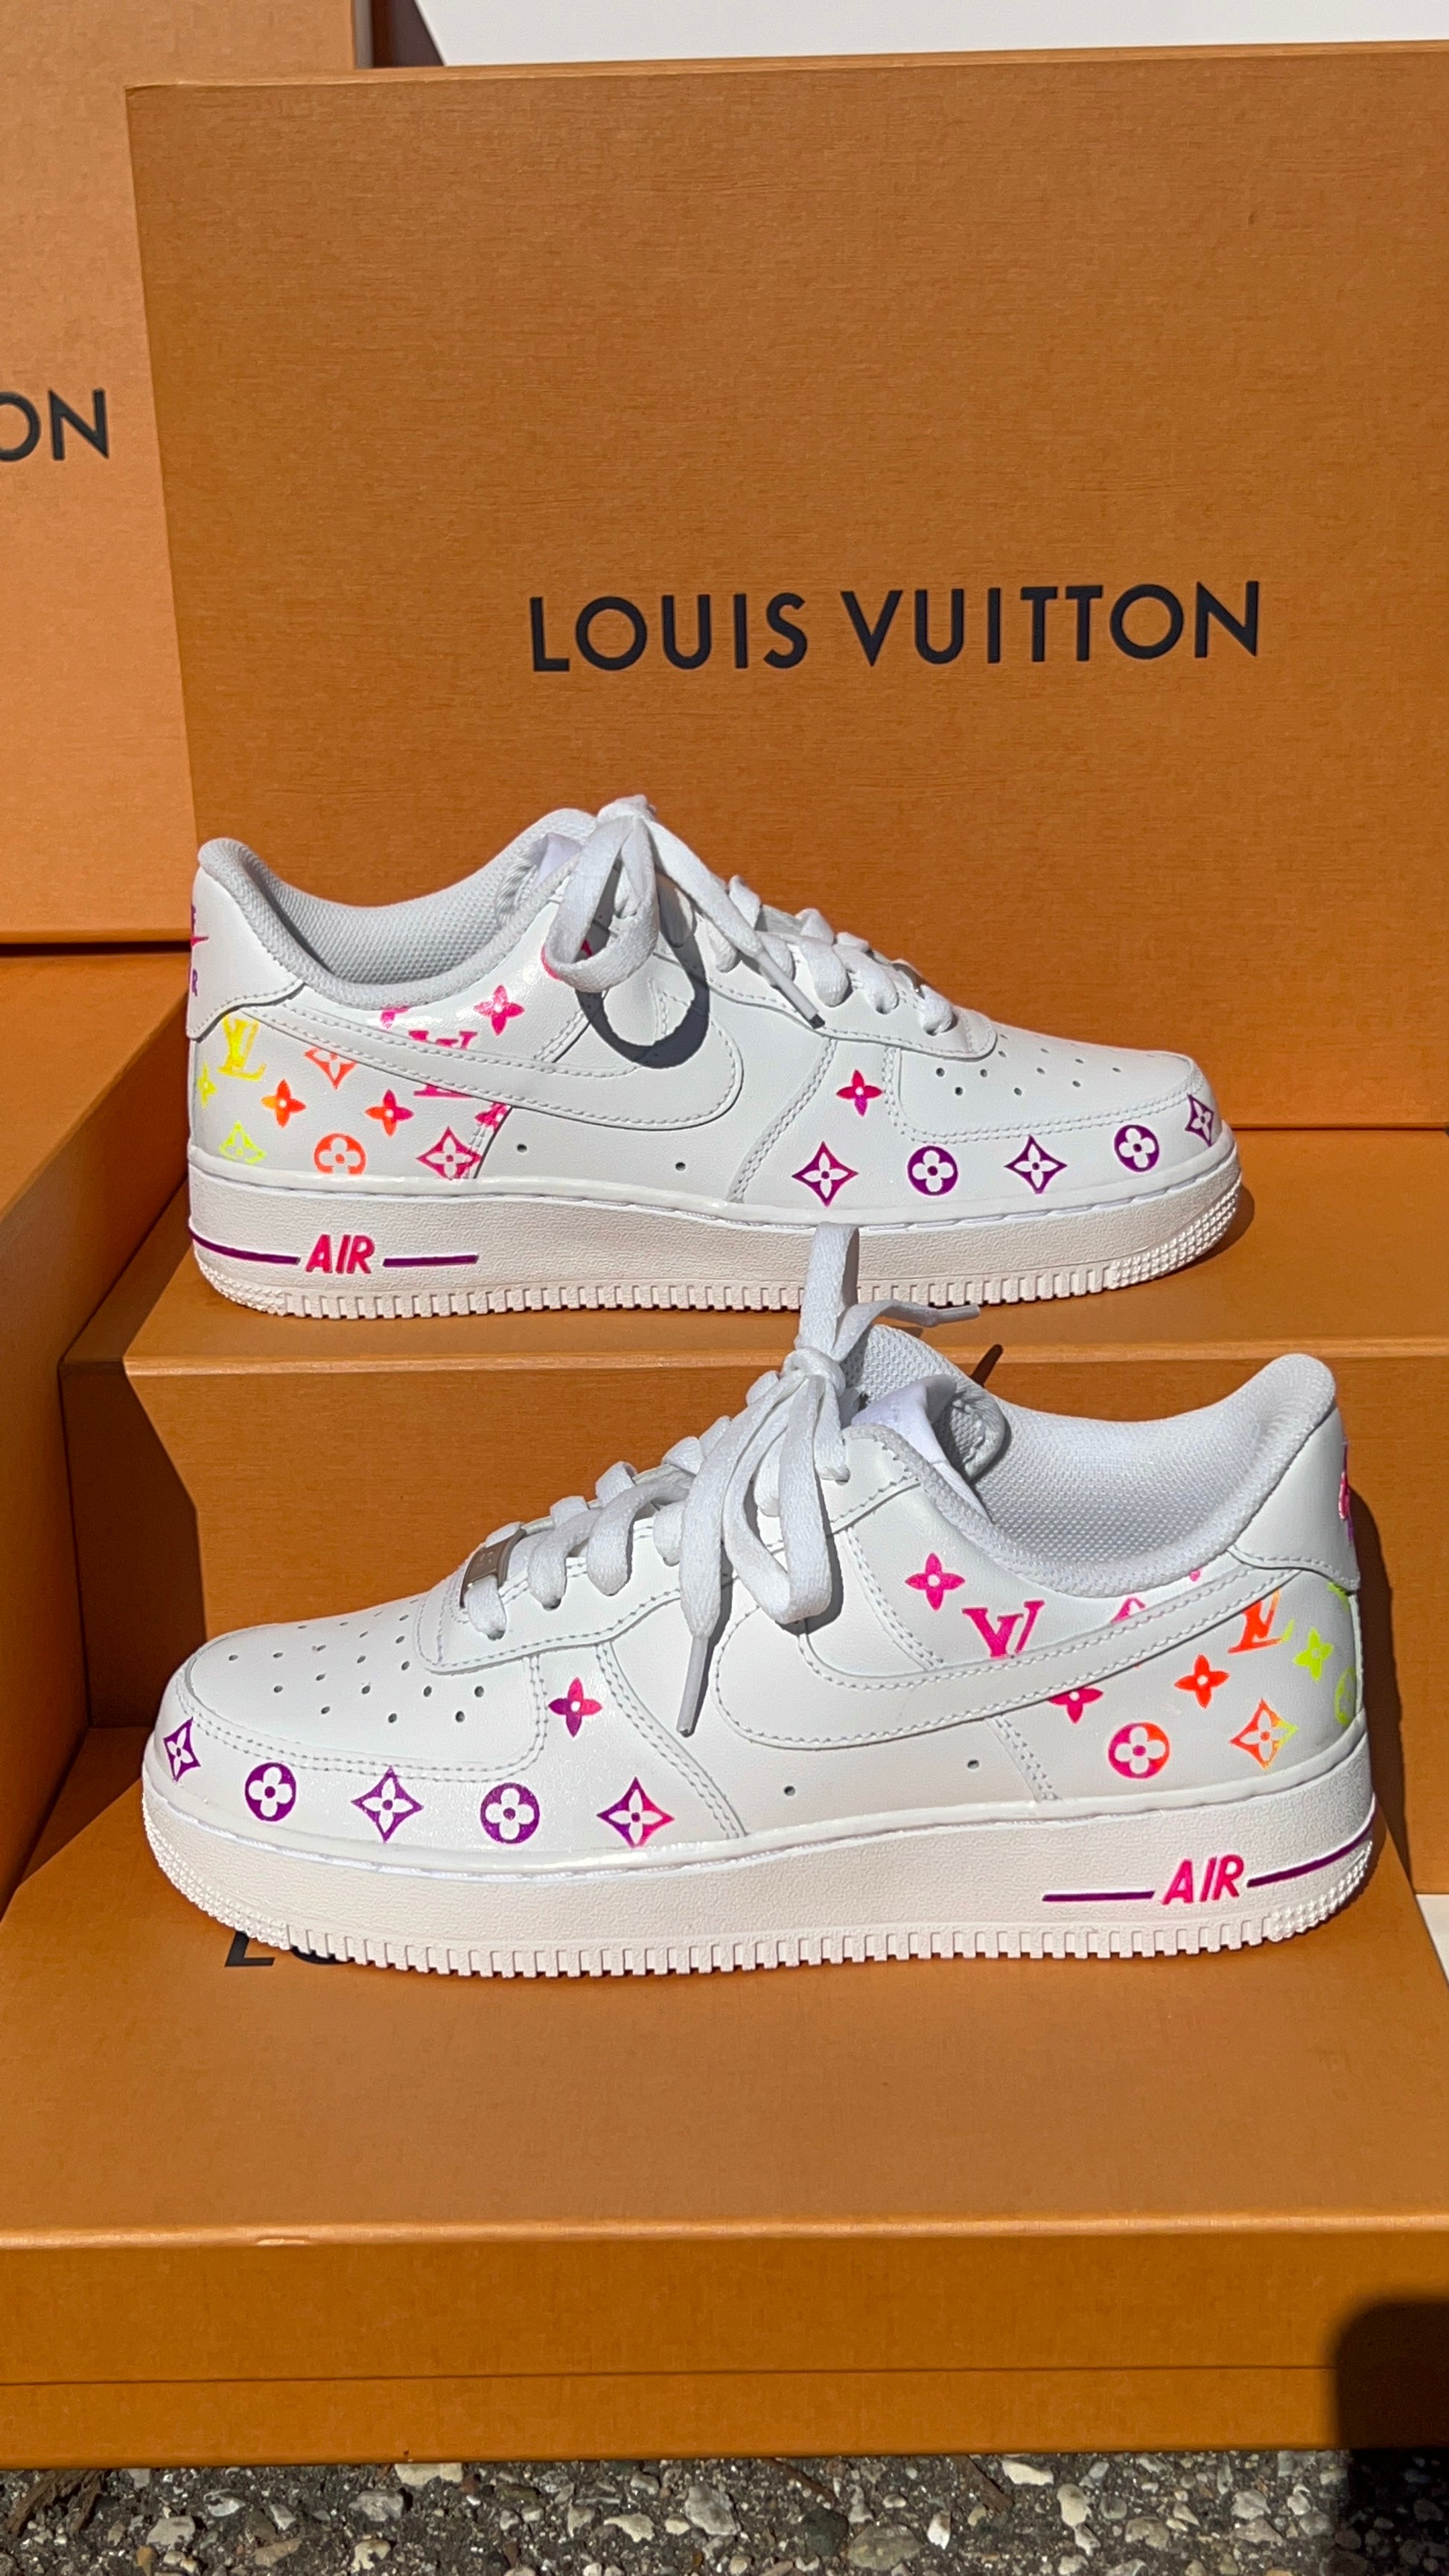 Brand New Louis Vuitton Men Shoes In White Grade A Copy for